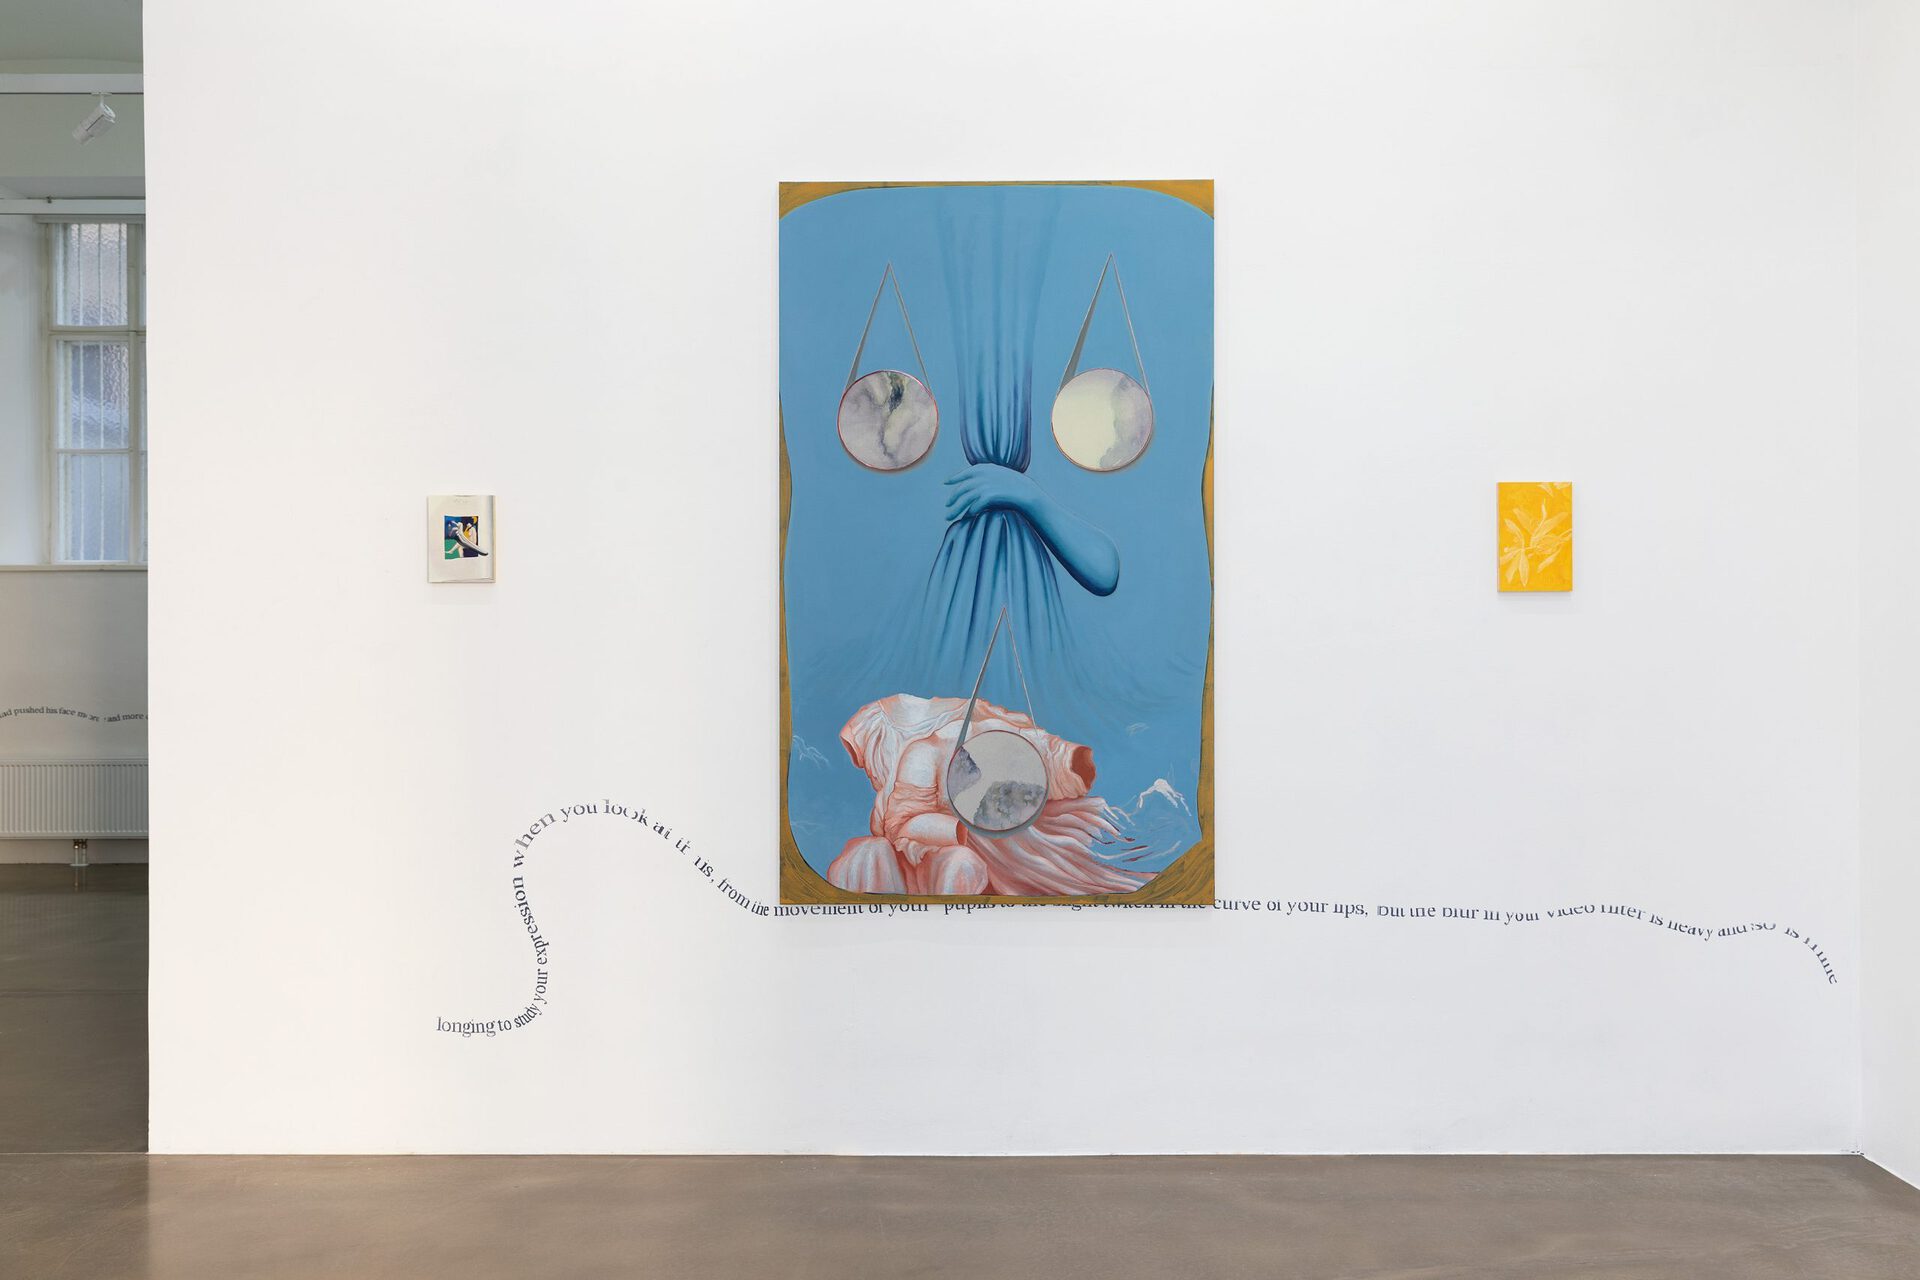 Titania Seidl, The three looking glasses or The three magnifying glasses or The hour glass, 2021, 200x120 cm, watercolor and oil on canvas, installation view